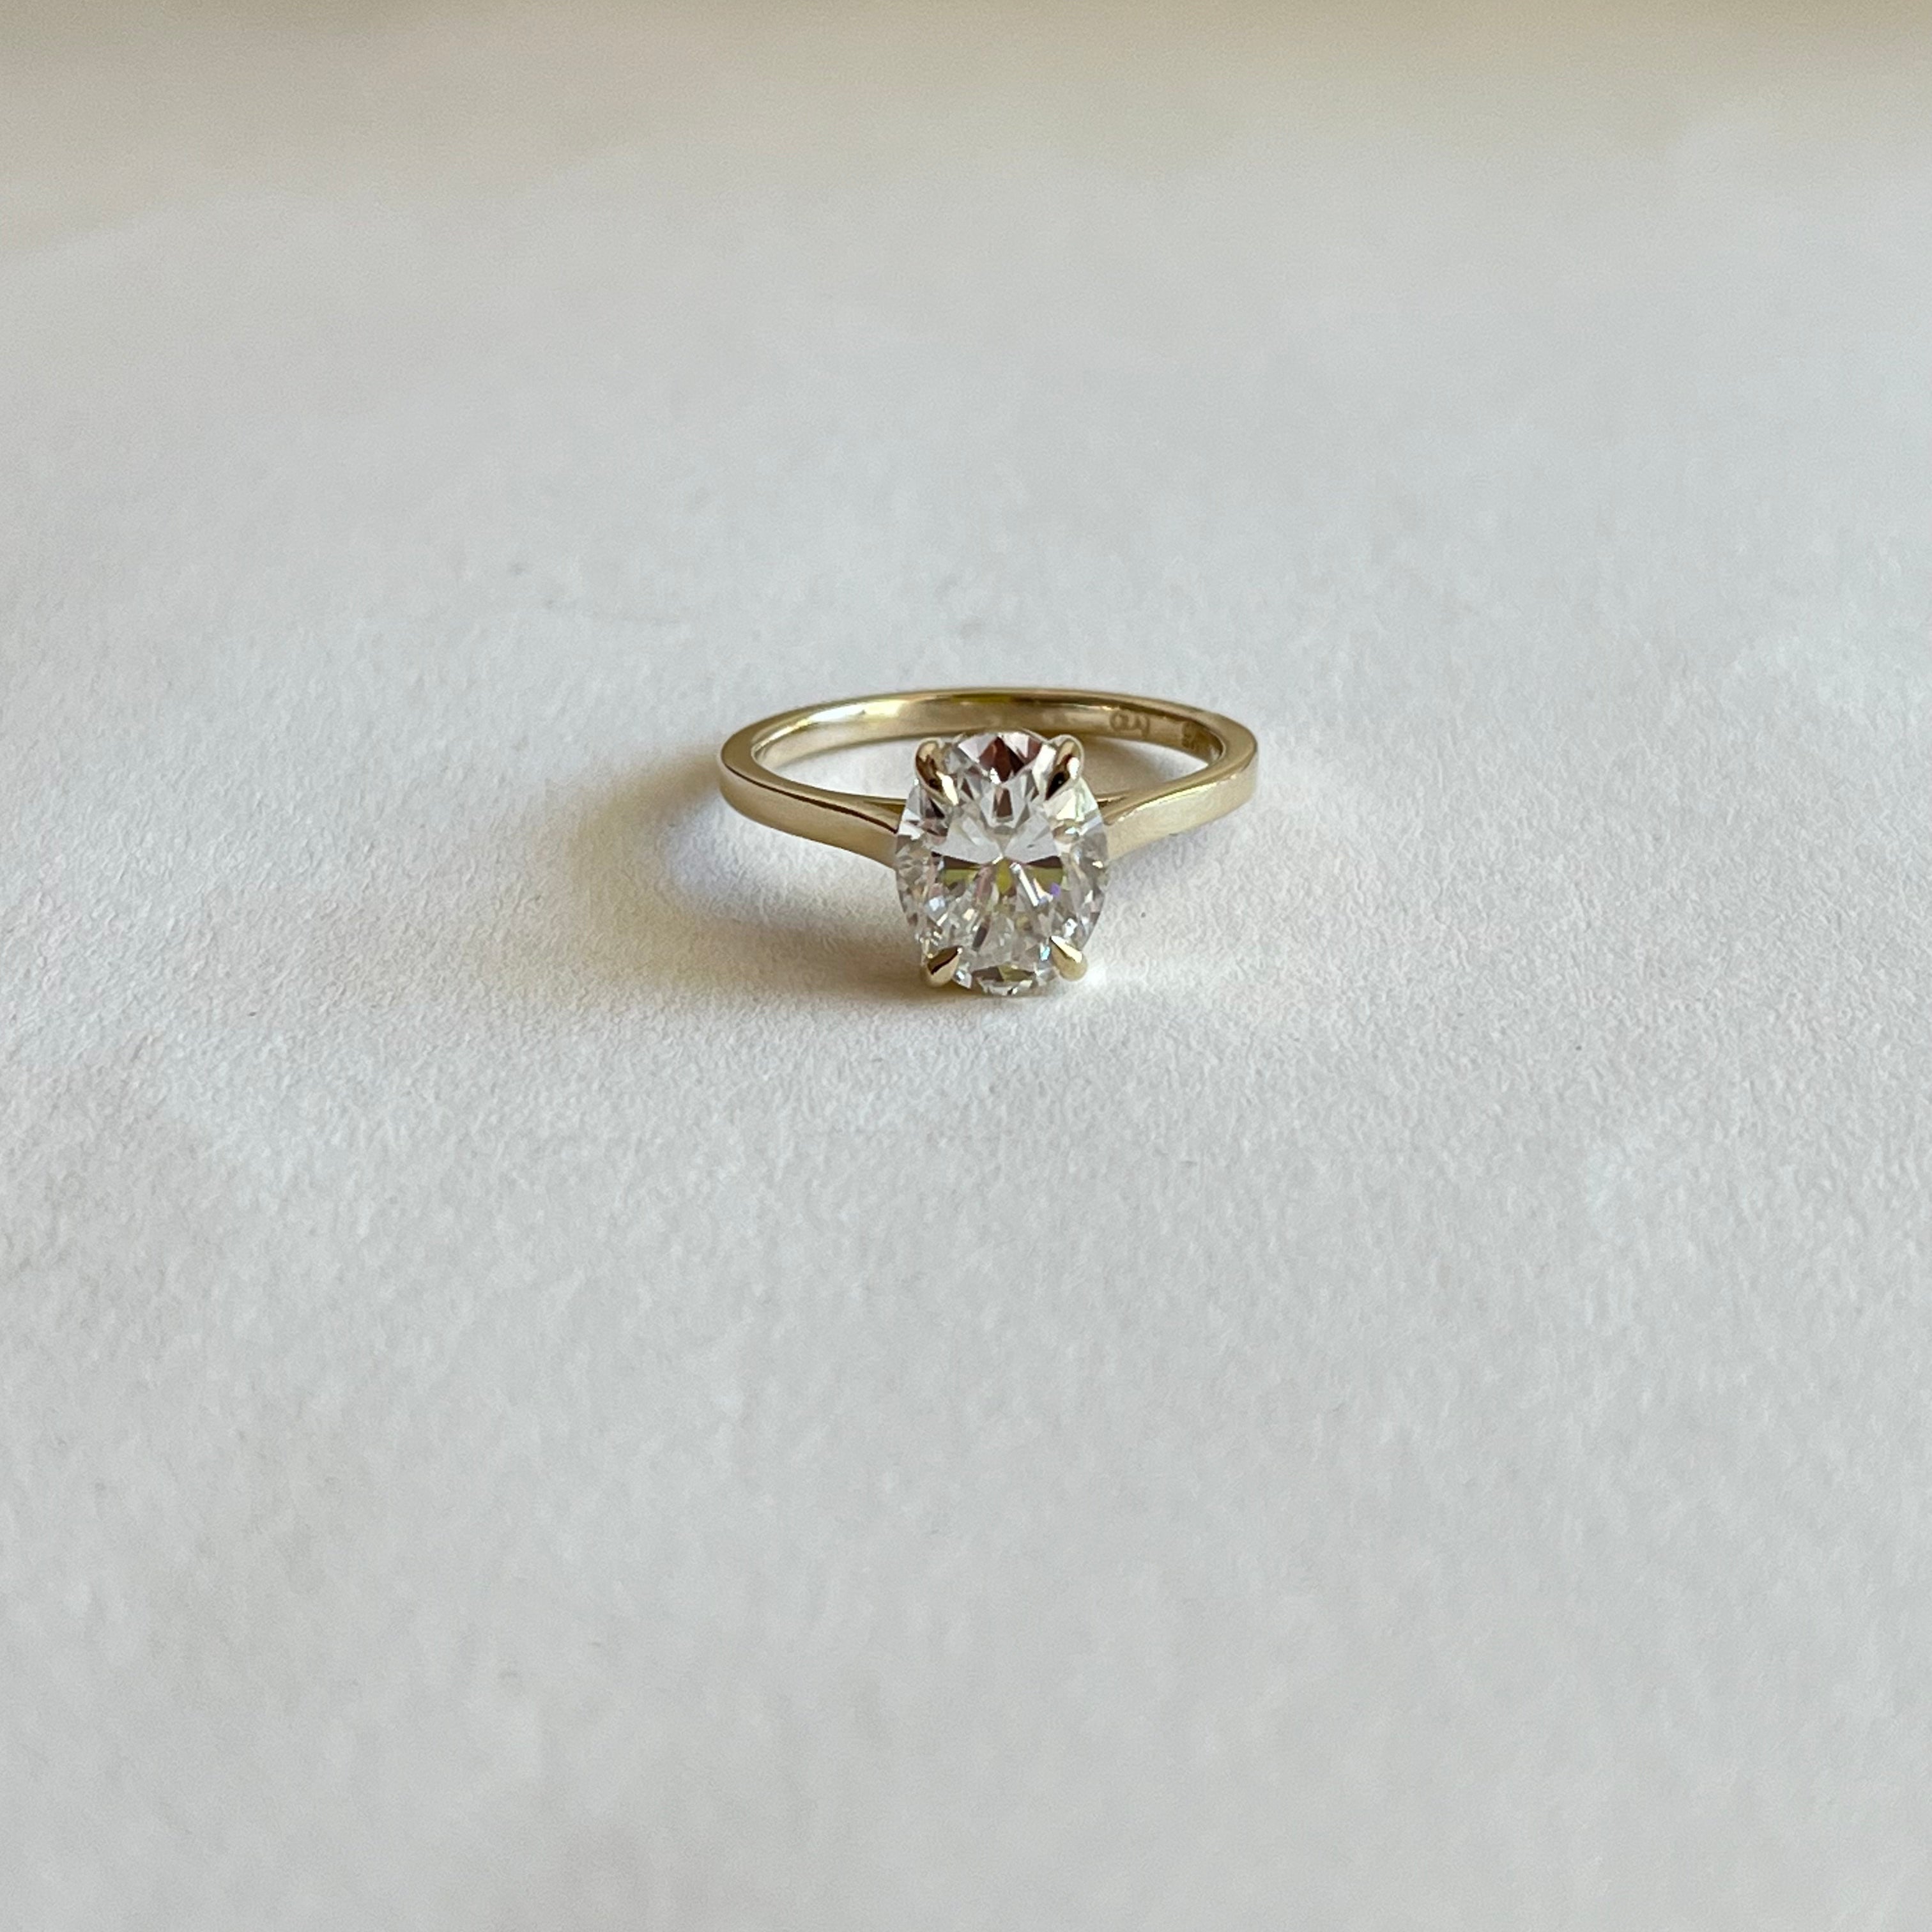 2ct oval moissanite solitaire ring